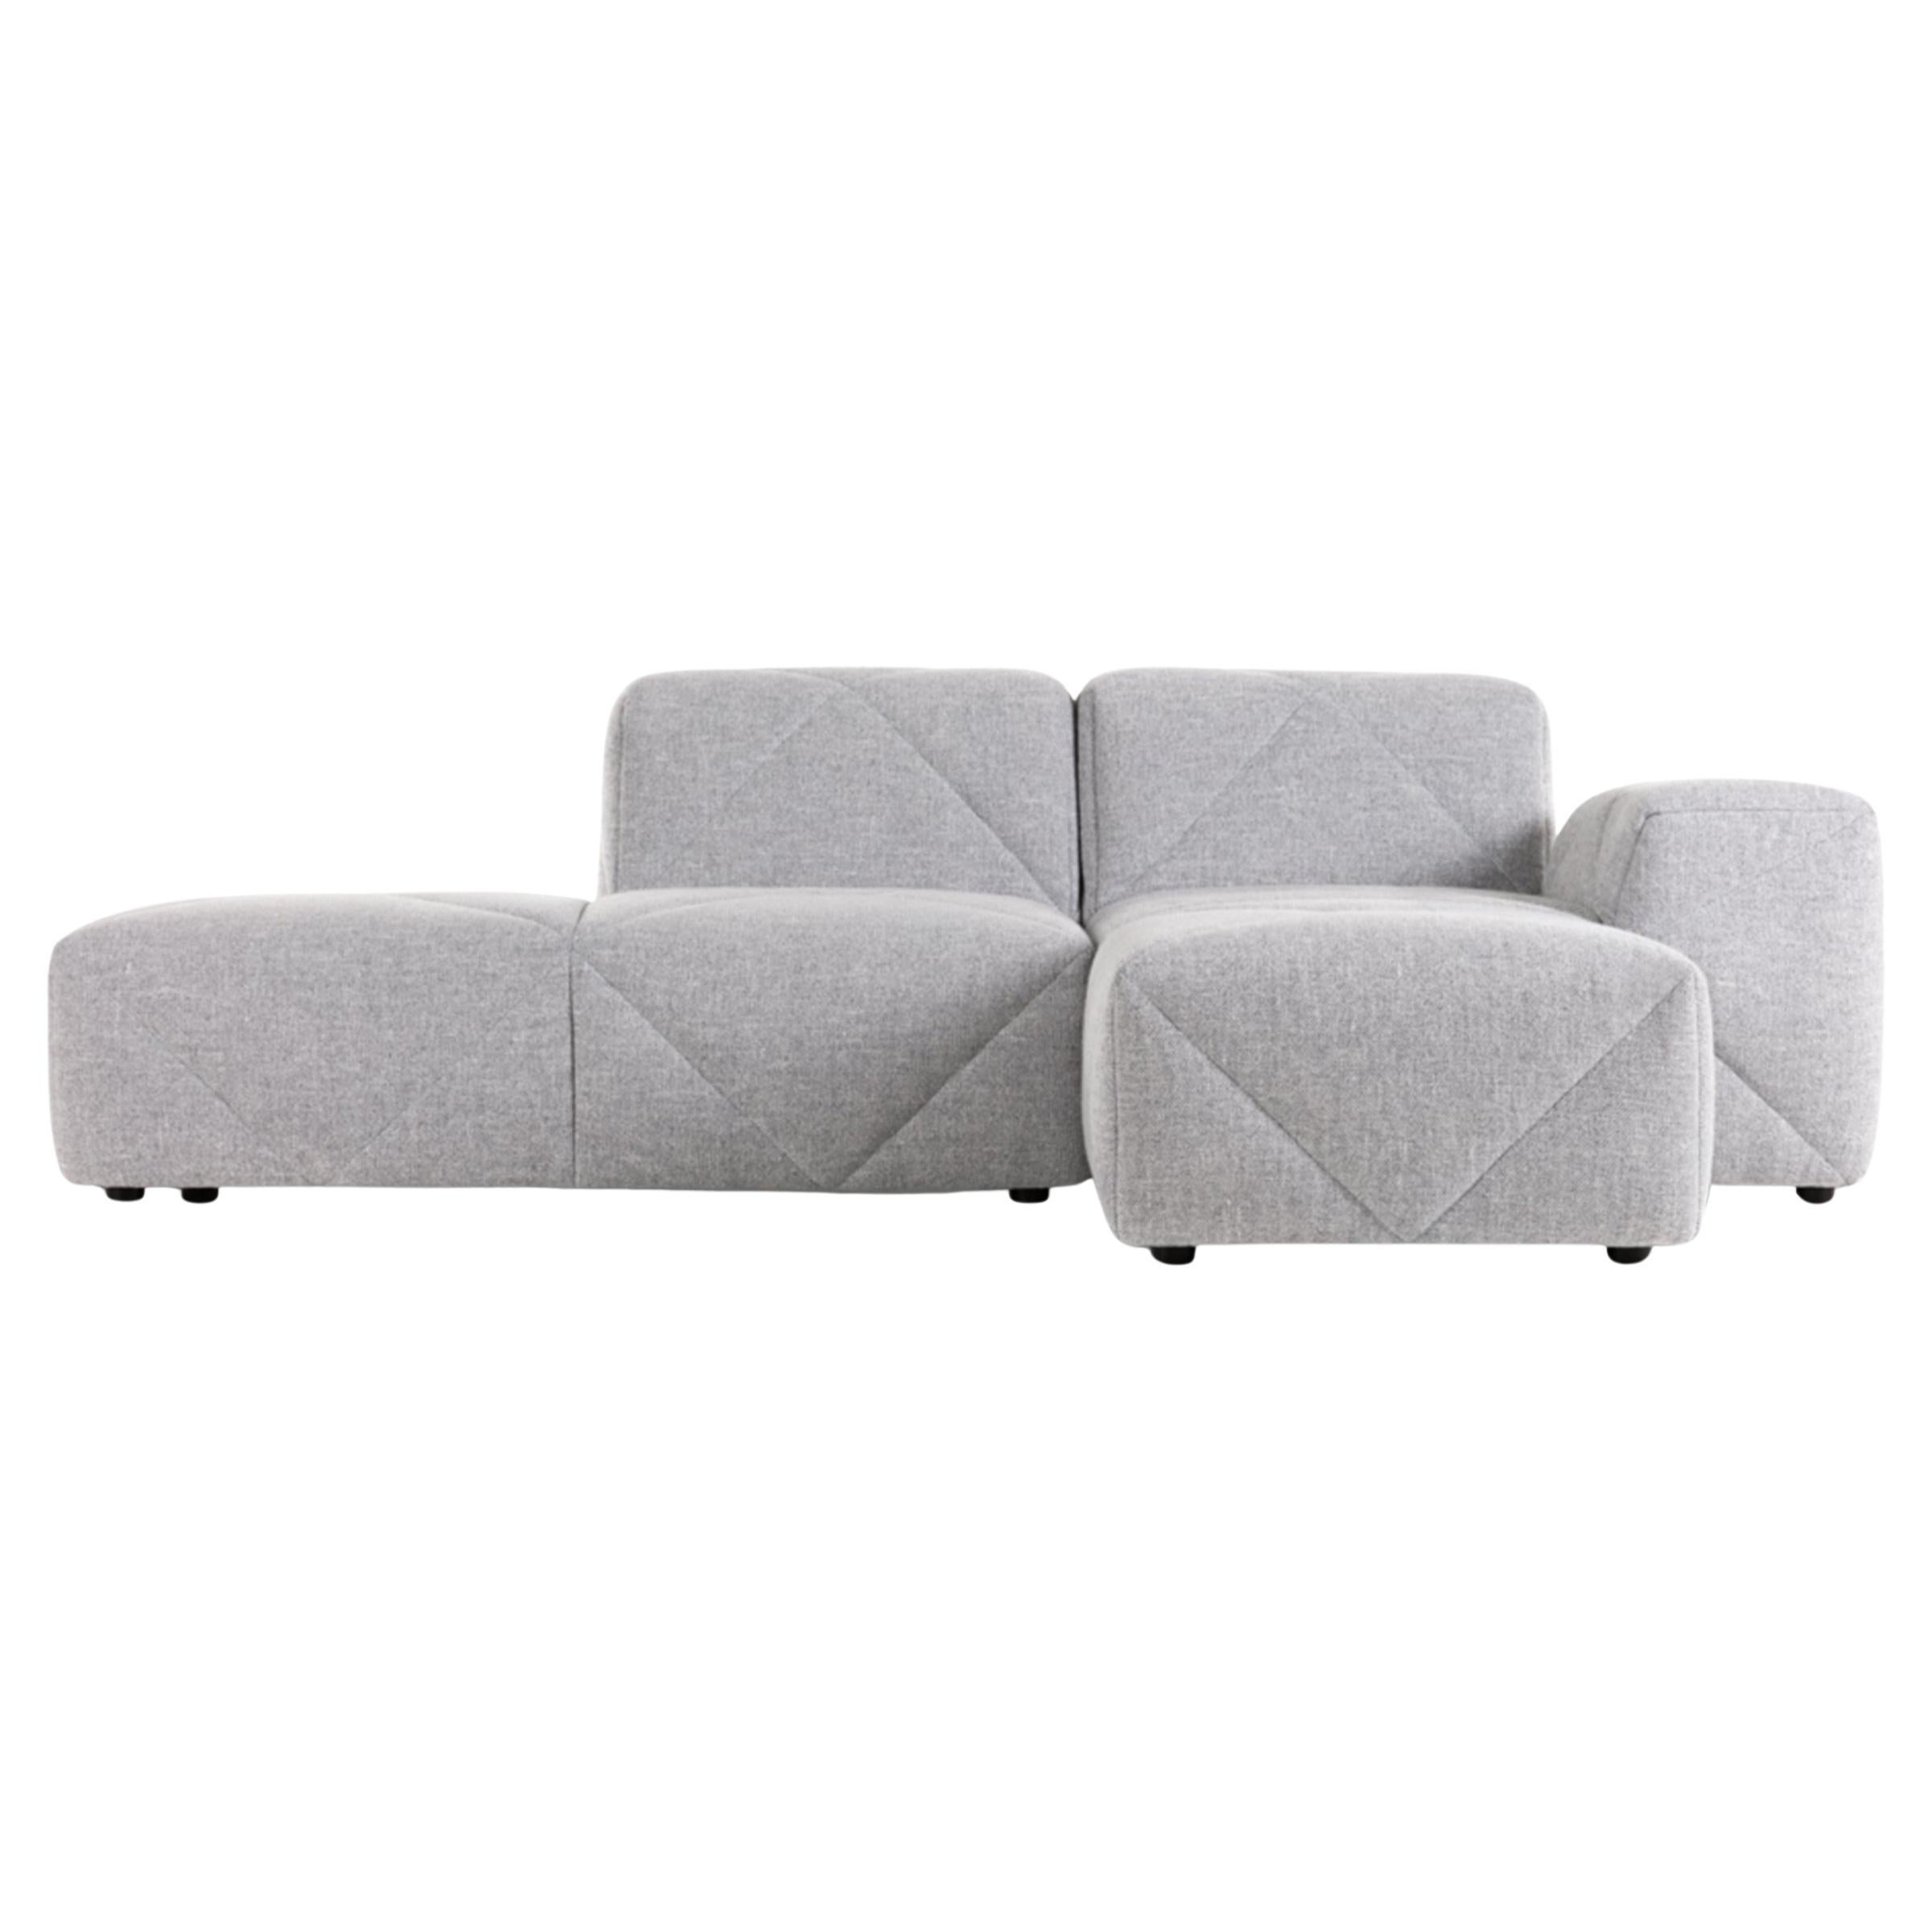 Moooi BFF Right Arm Chaise Longue Sofa in Vesper, Silver Upholstery For Sale